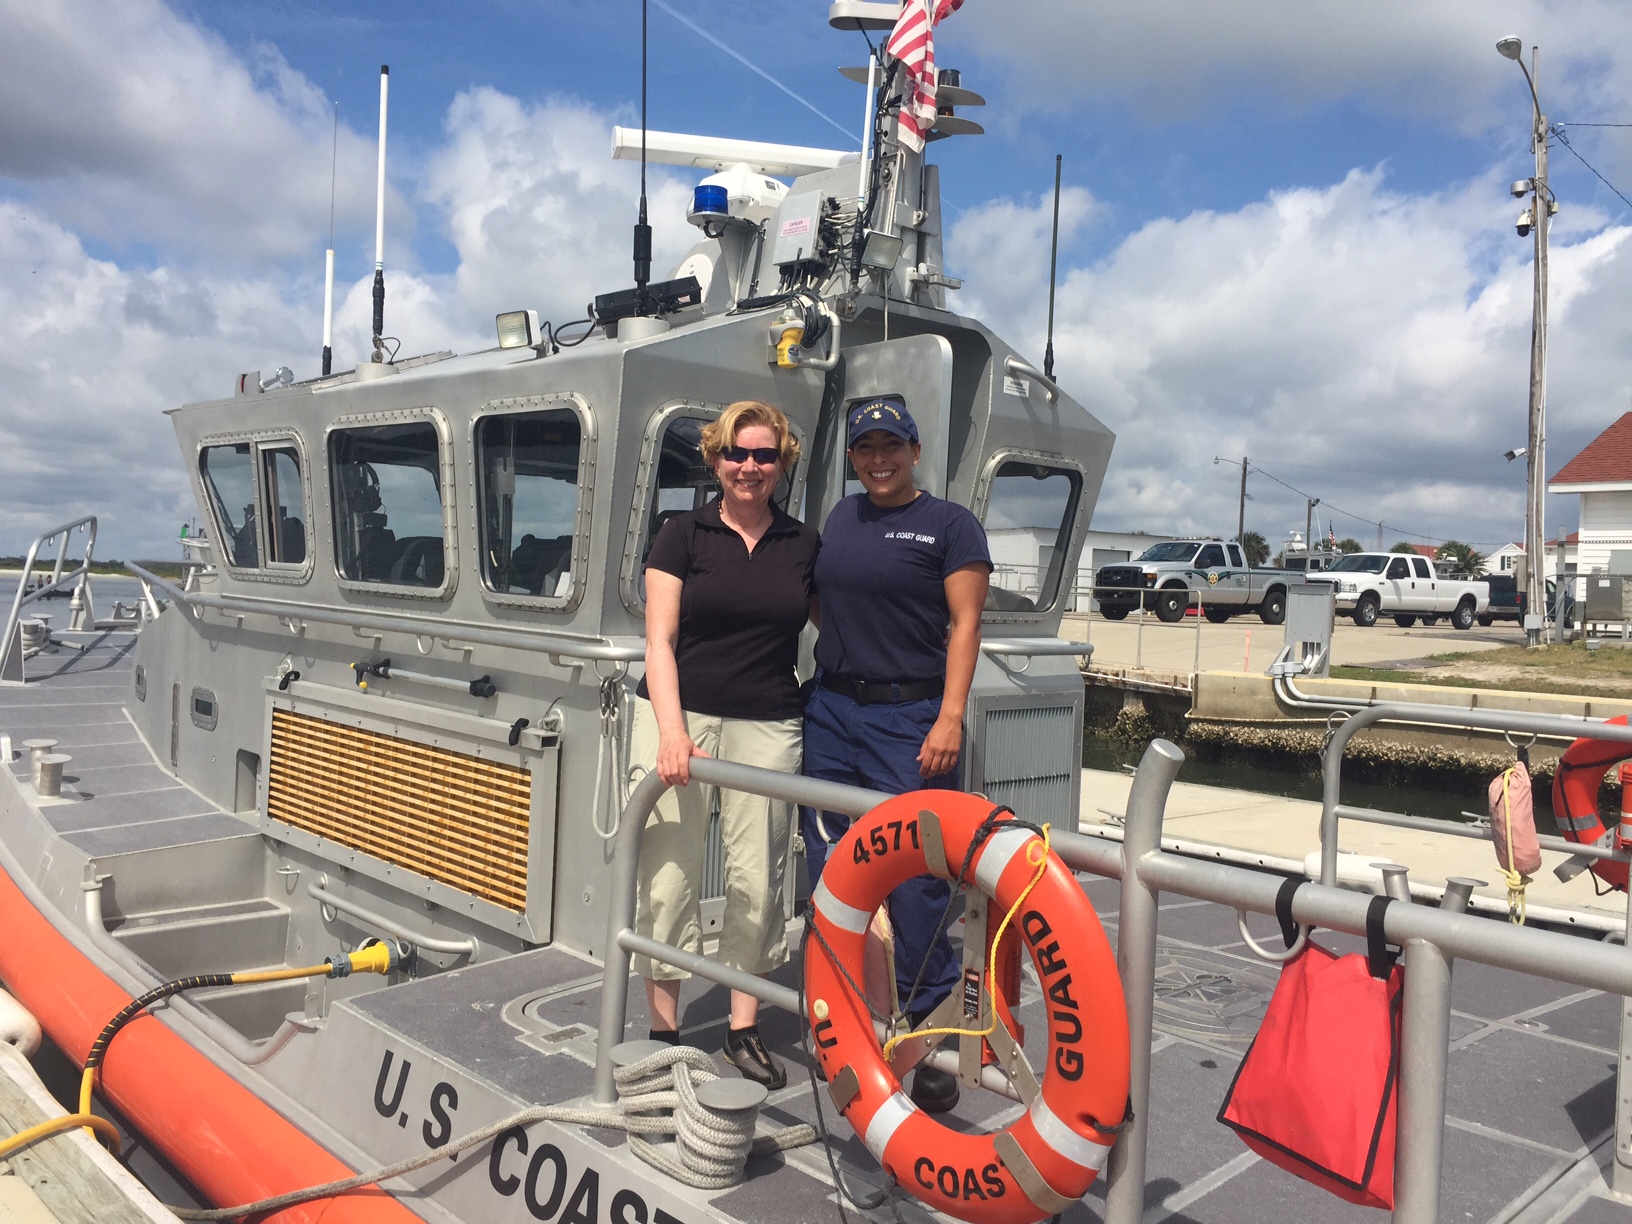 Up Close with the U.S. Coast Guard (Day 154)